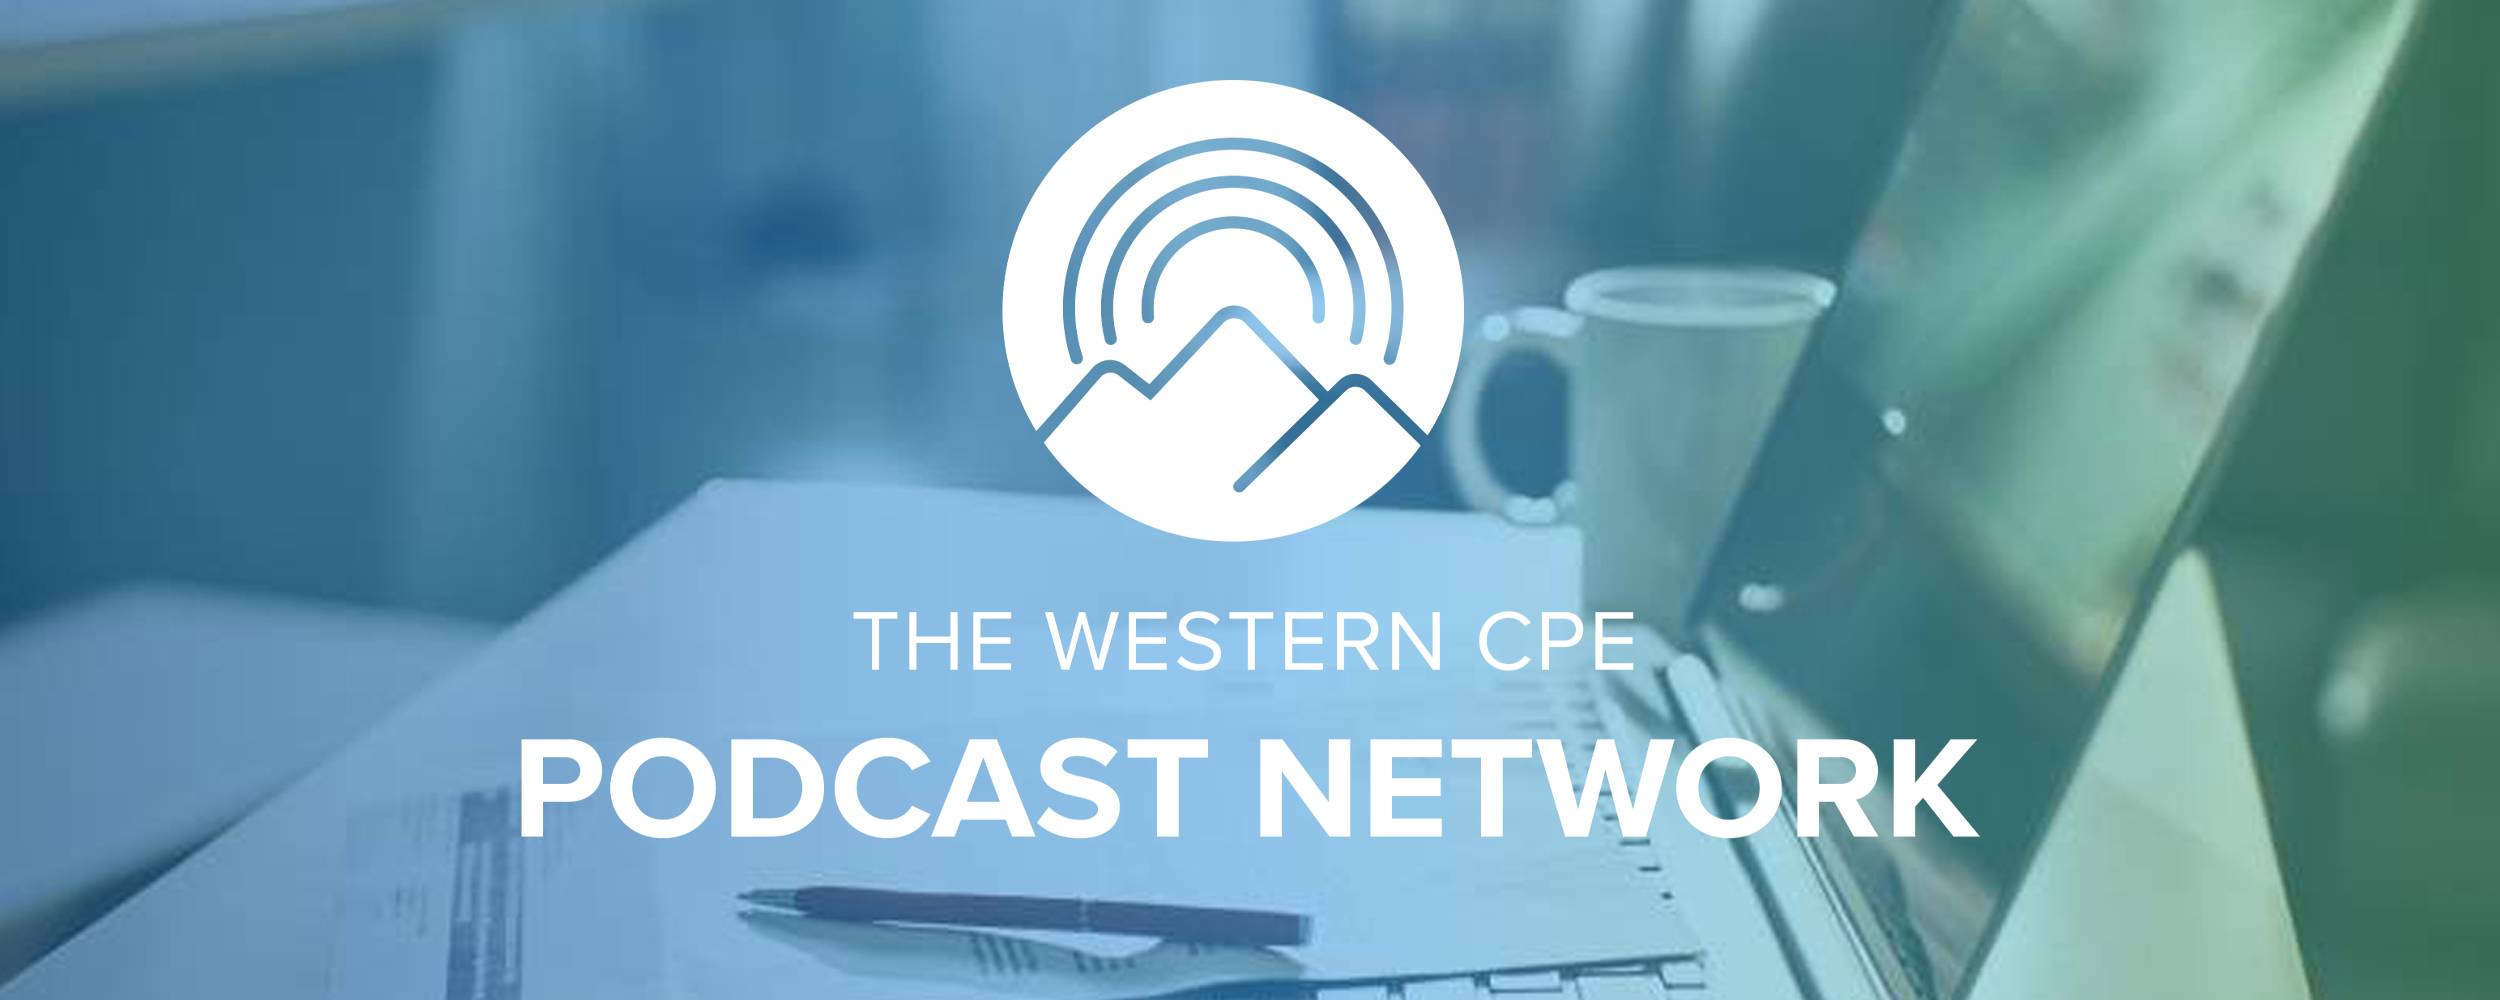 Western CPE podcast network header image